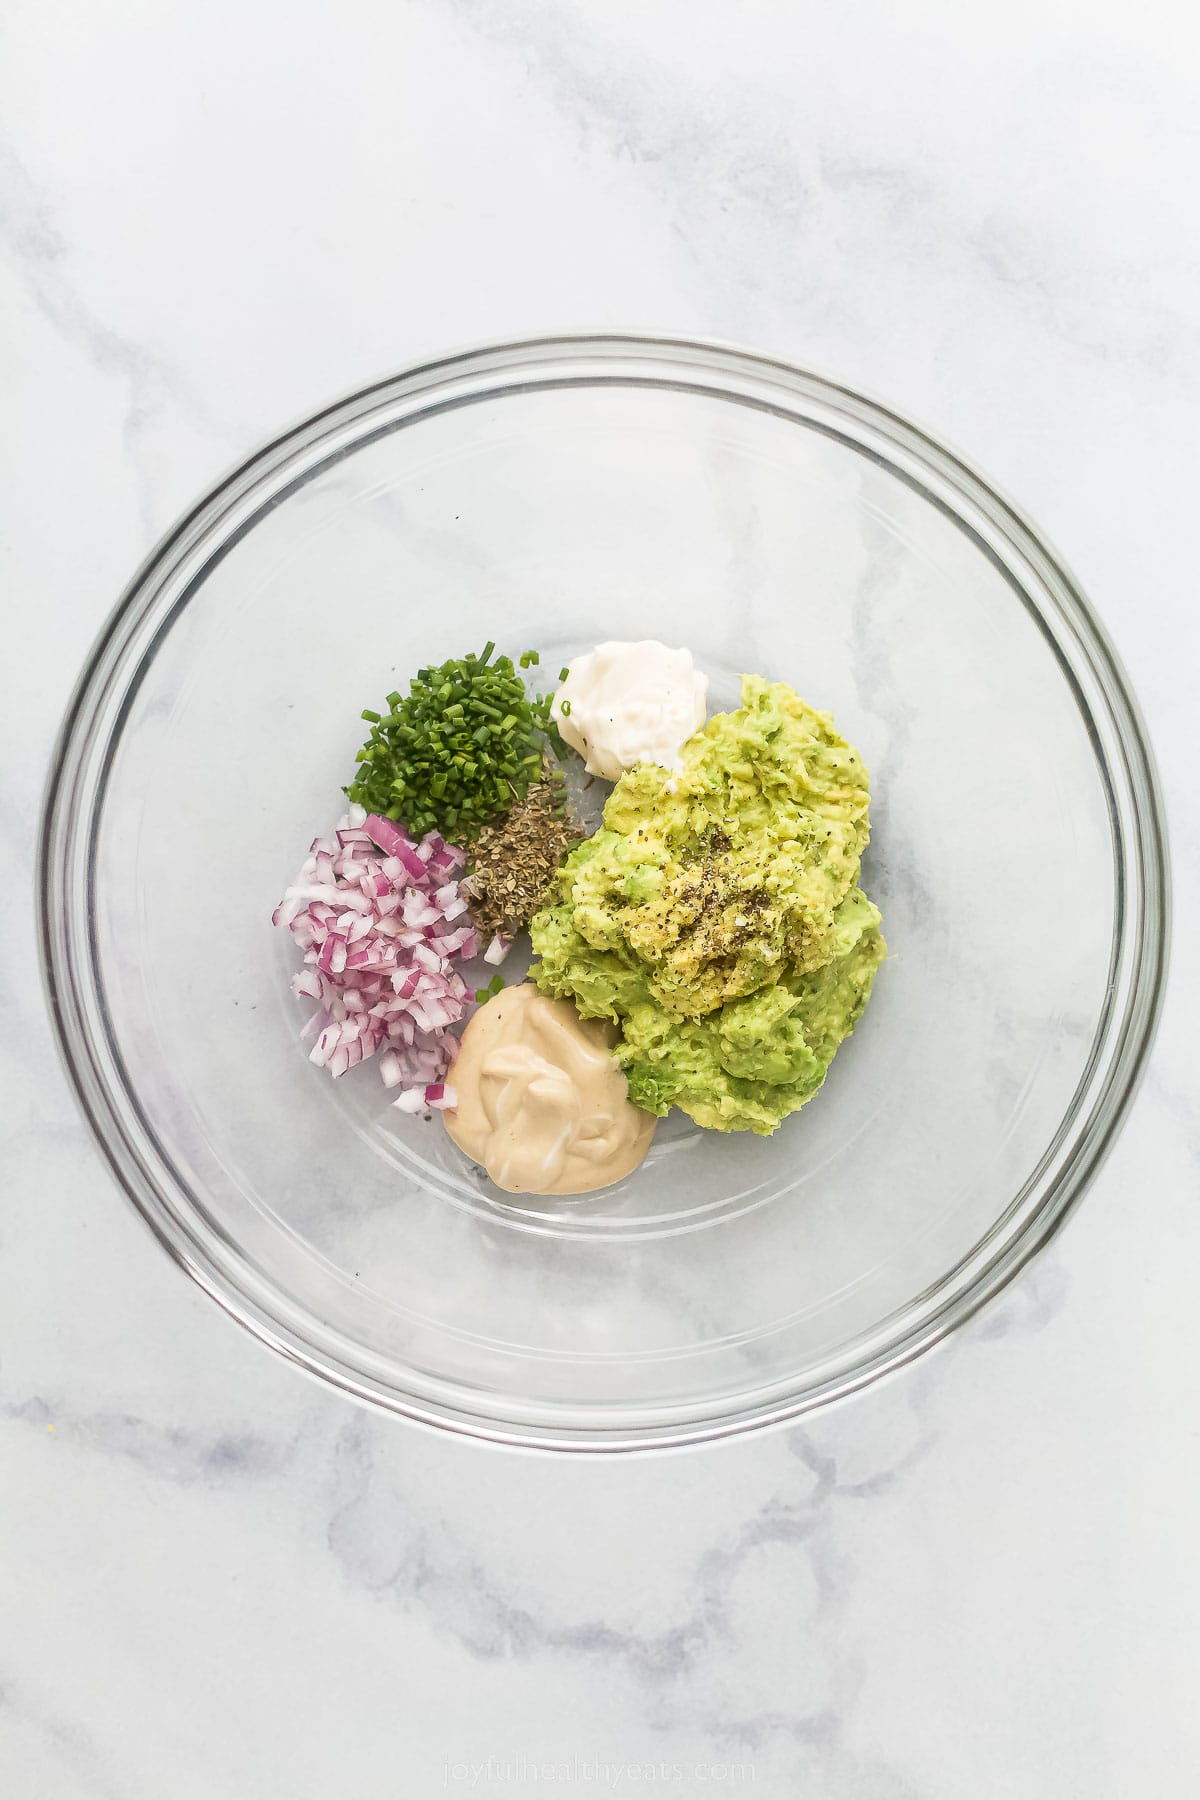 various ingredients to make an avocado dressing like avocado, red onion, and chives.